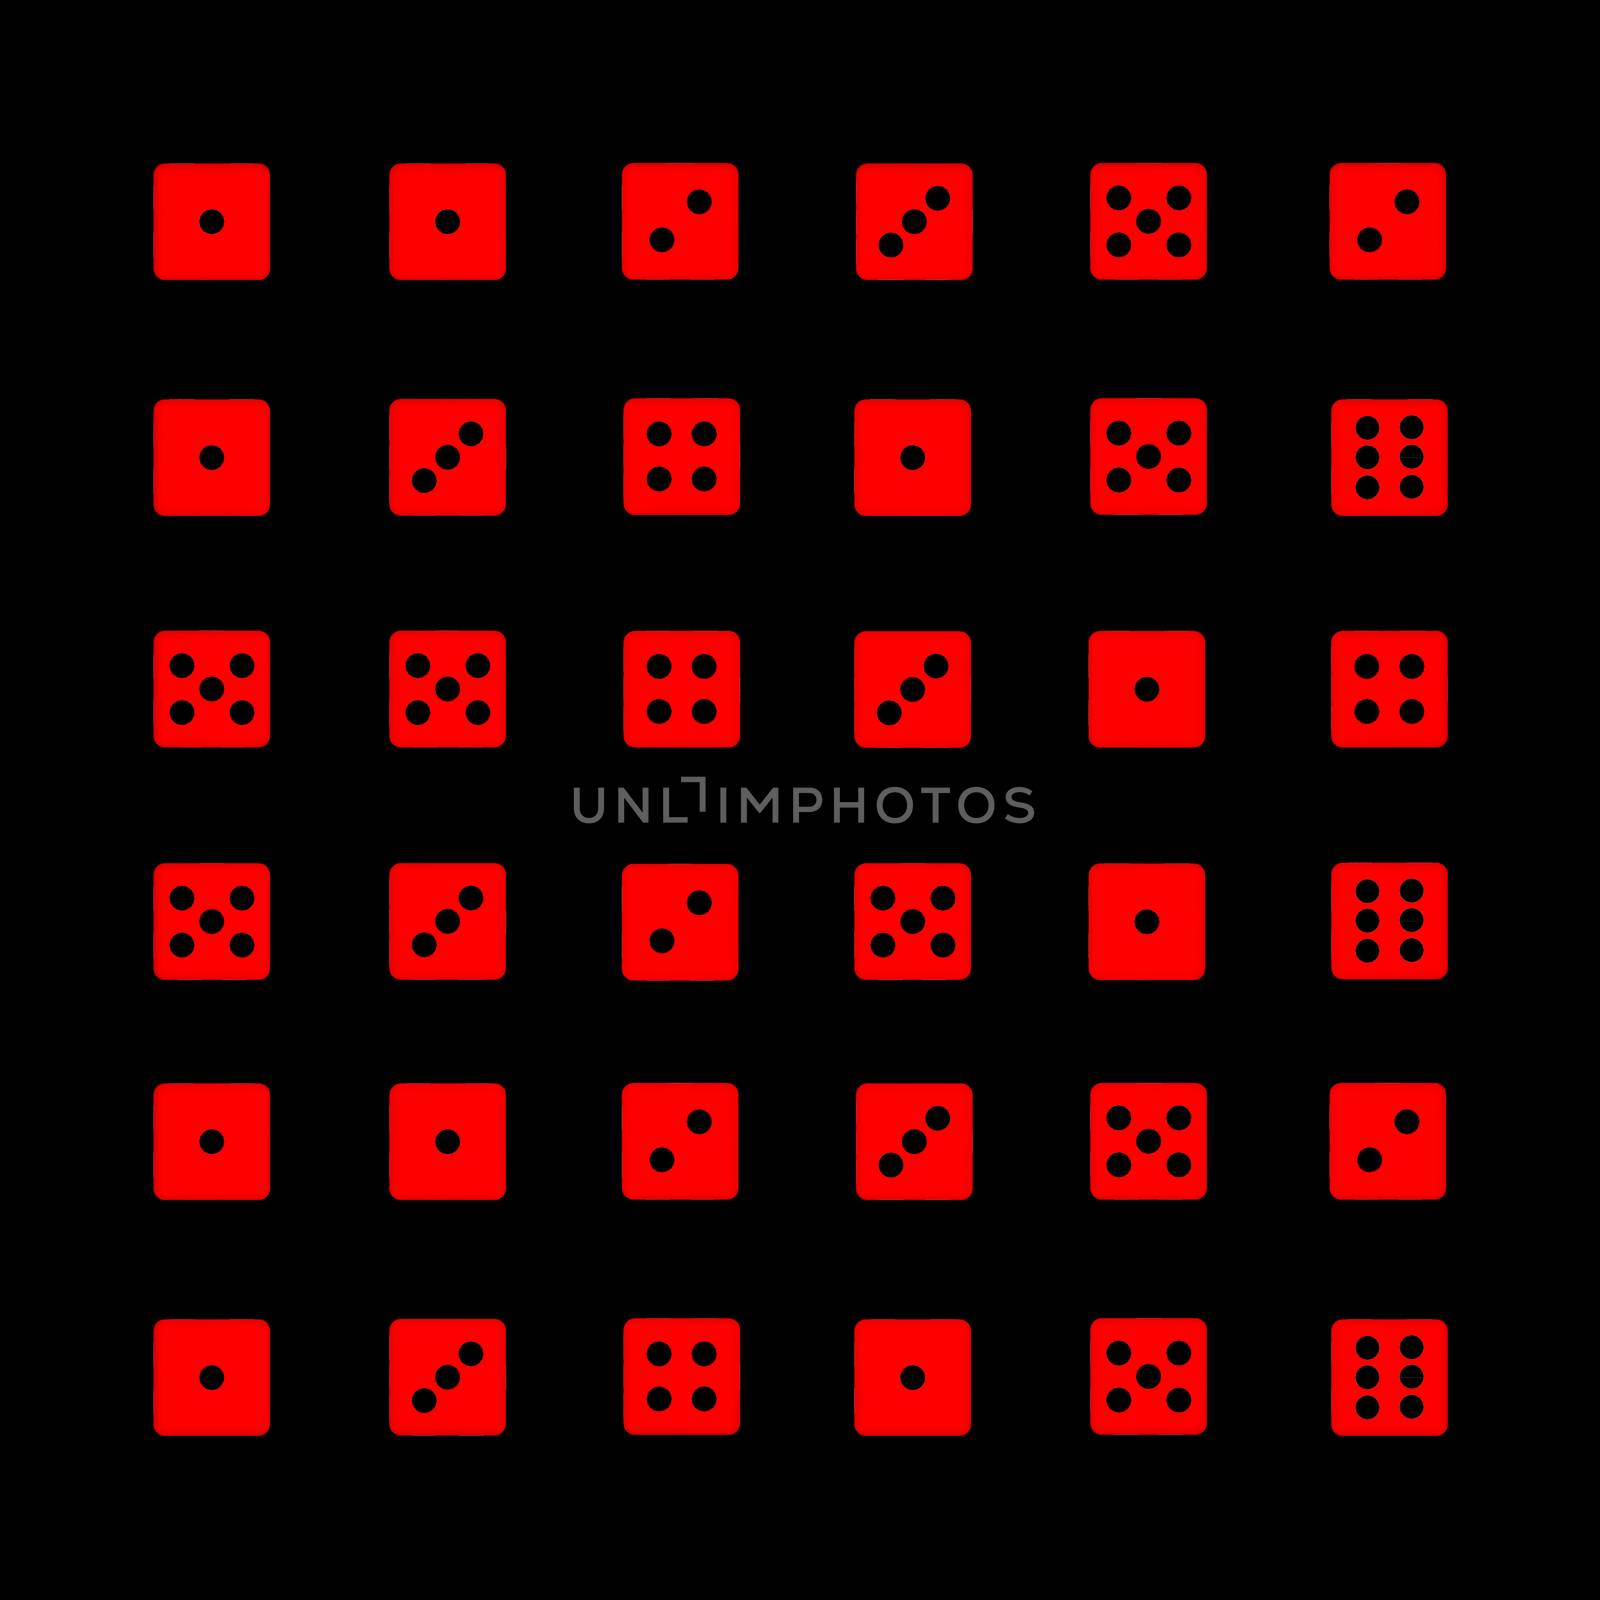 ILLUSTRATION OF ABSTRACT BACKGROUND OF PATTERN MADE WITH DICE